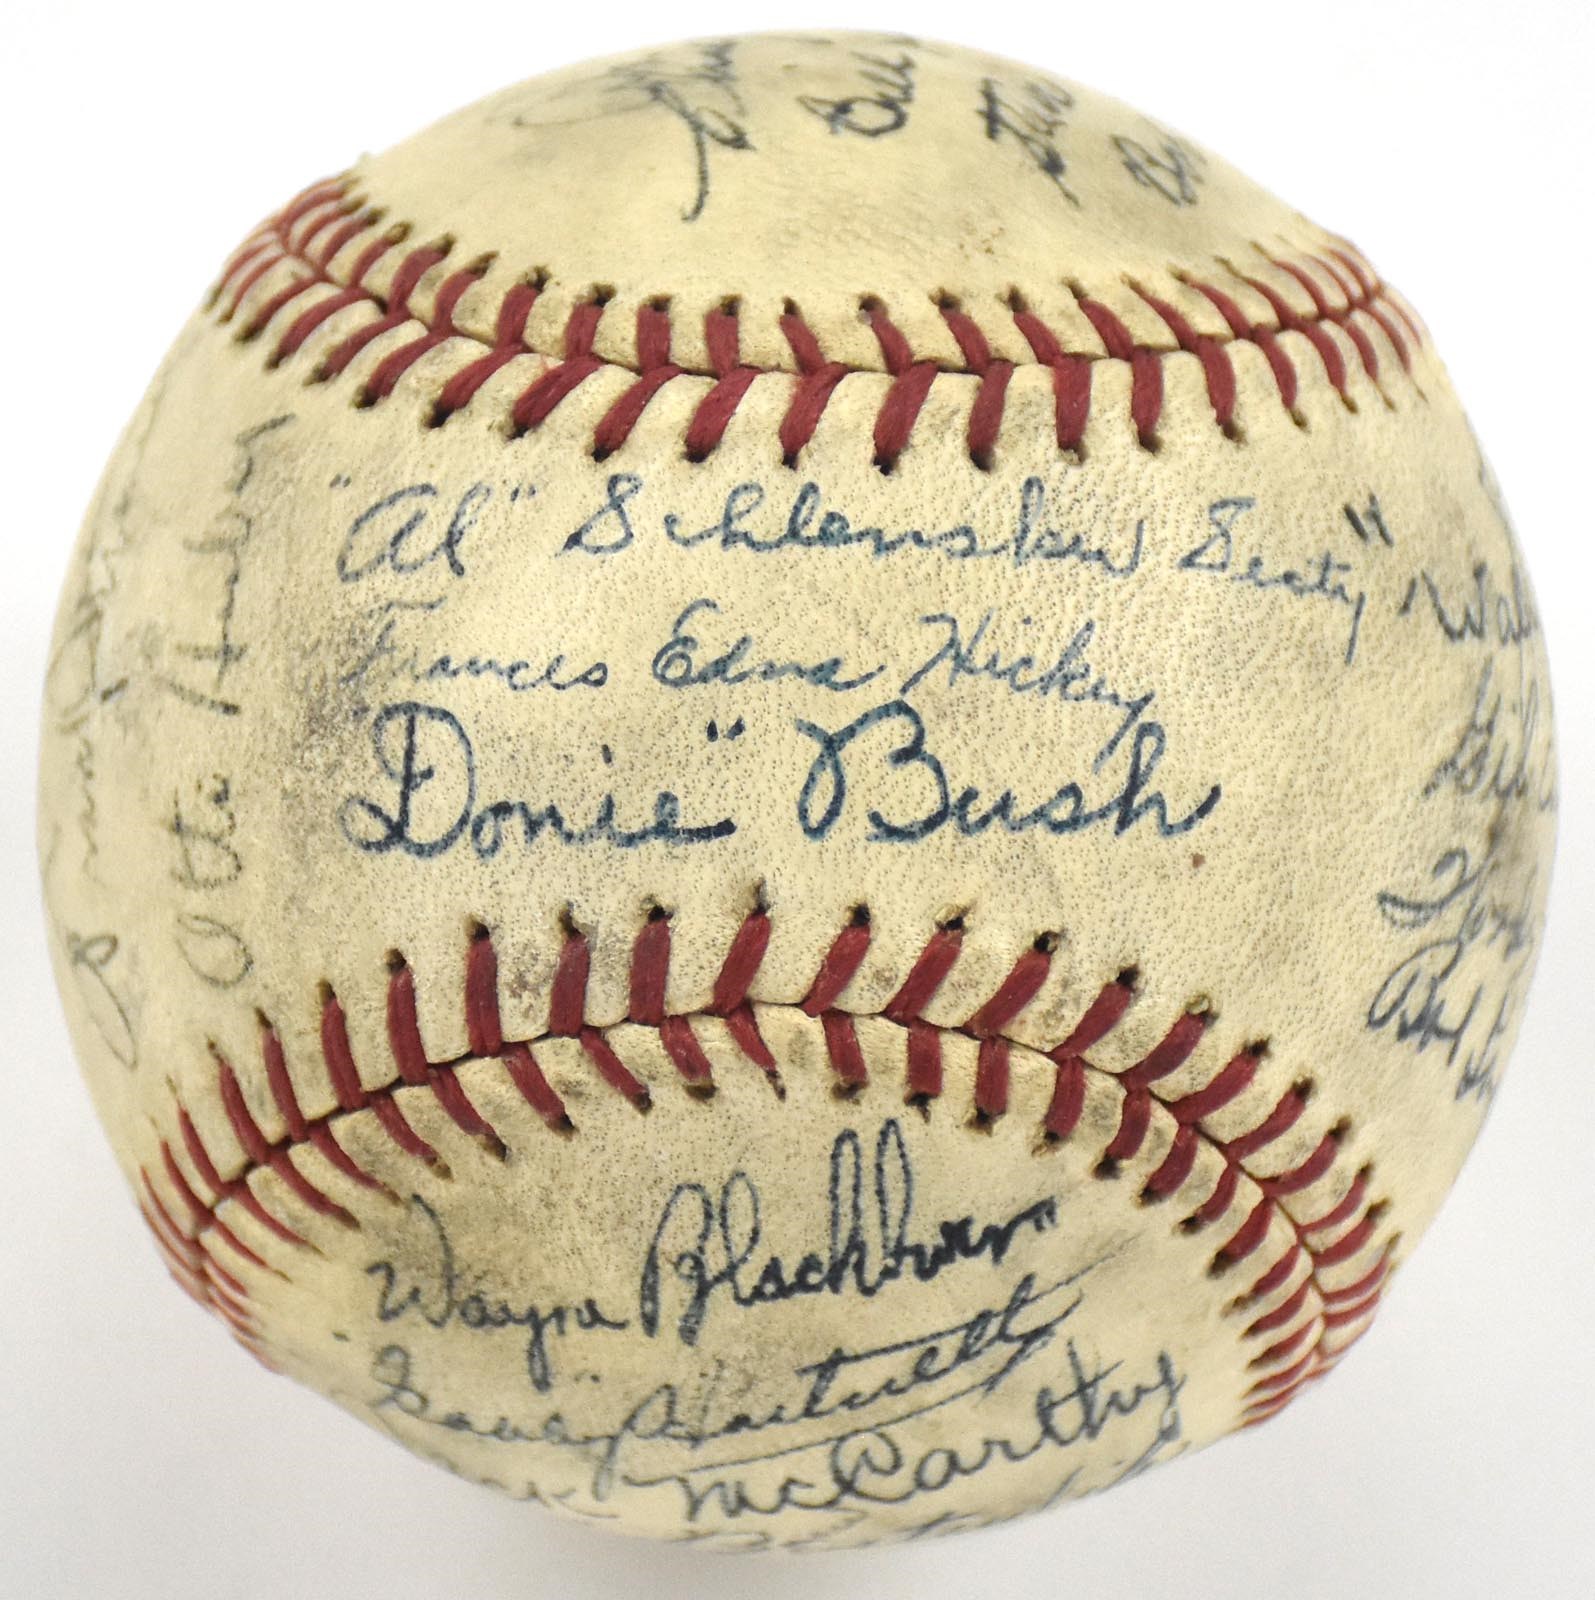 - 1942 Indianapolis Indians Team Signed Baseball with Gabby Hartnett and Donnie Bush